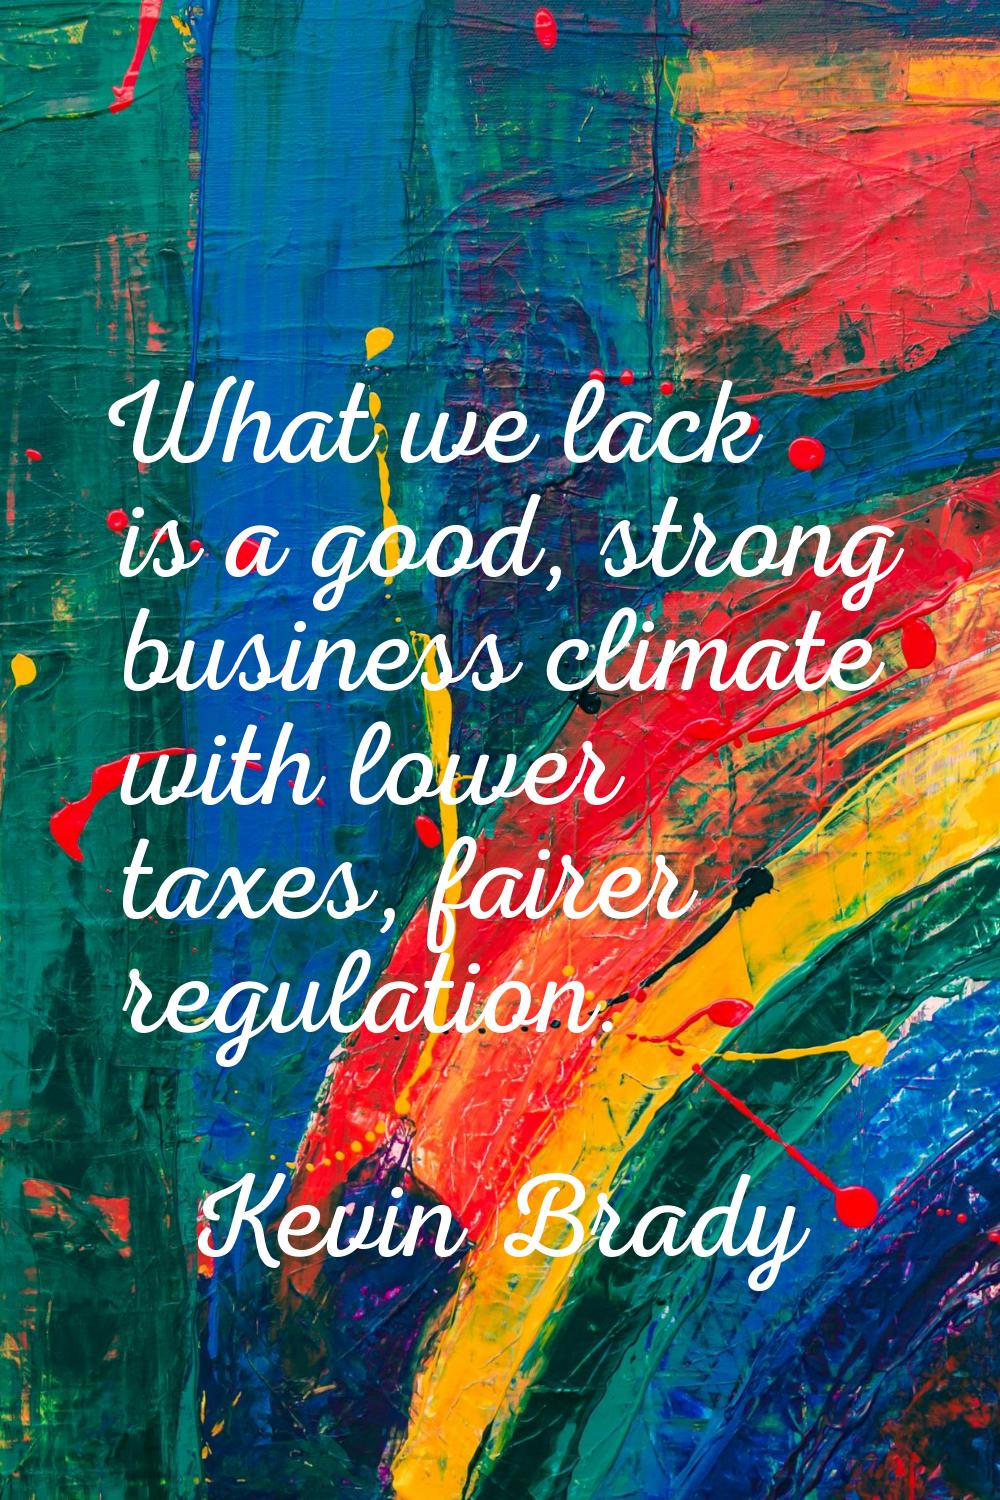 What we lack is a good, strong business climate with lower taxes, fairer regulation.